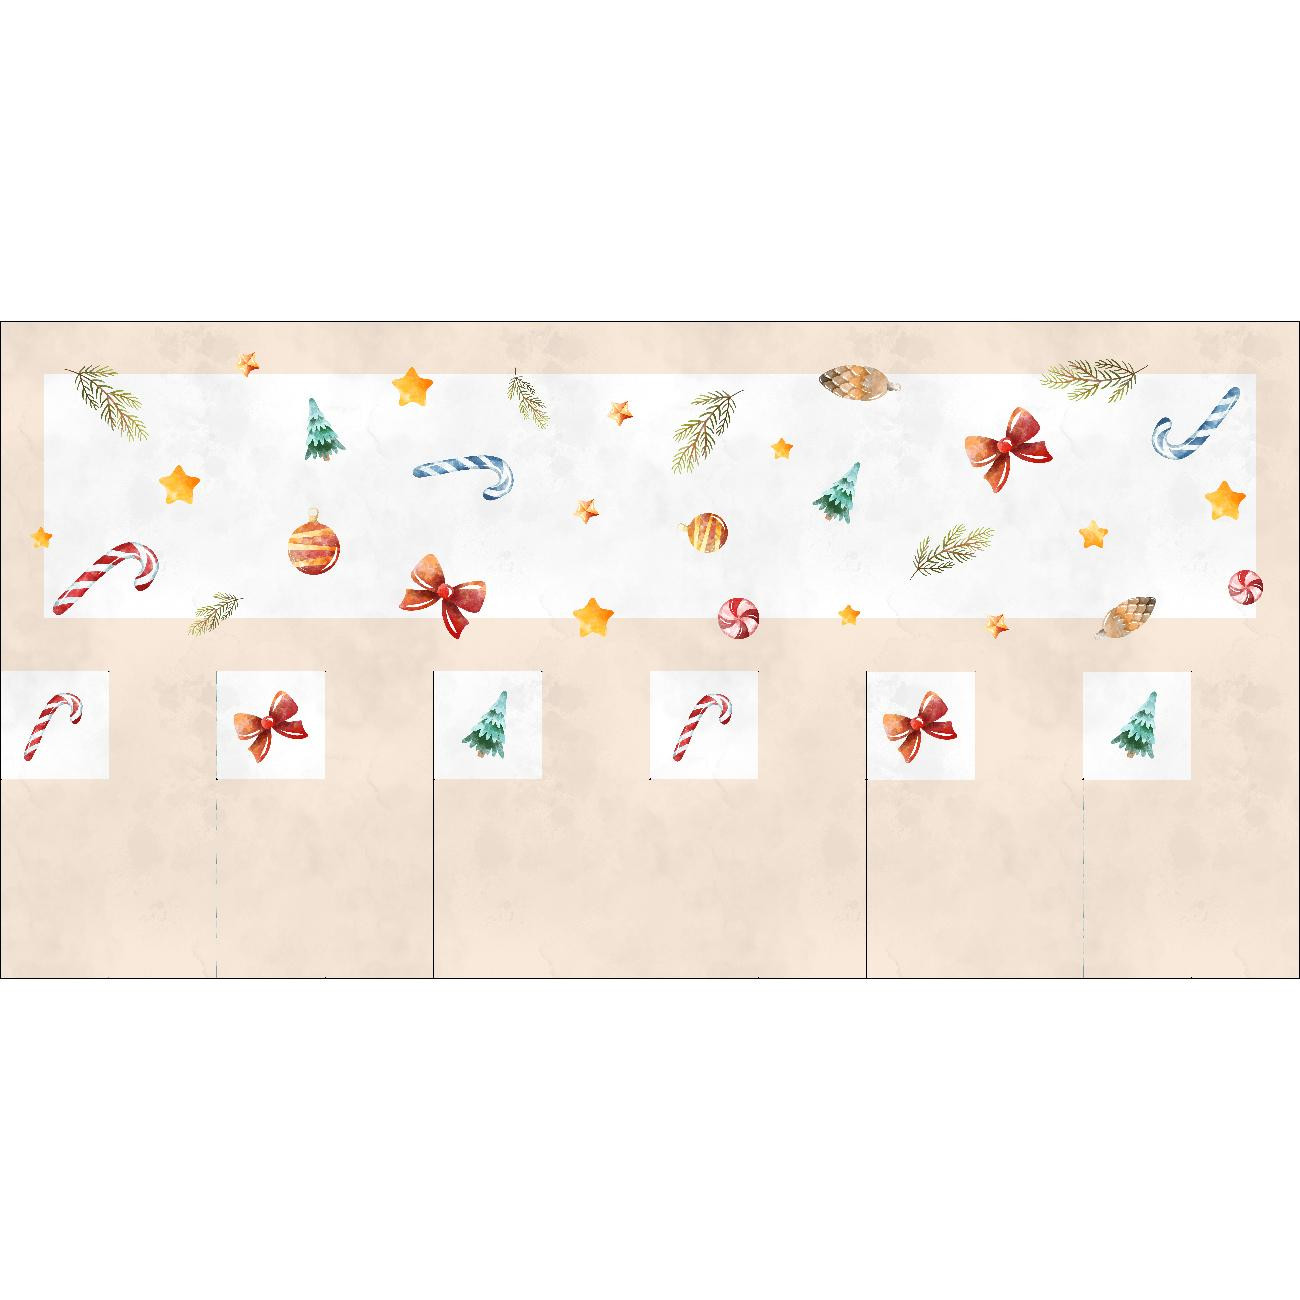 NAPKINS AND RUNNER - CHRISTMAS DECORATIONS - sewing set